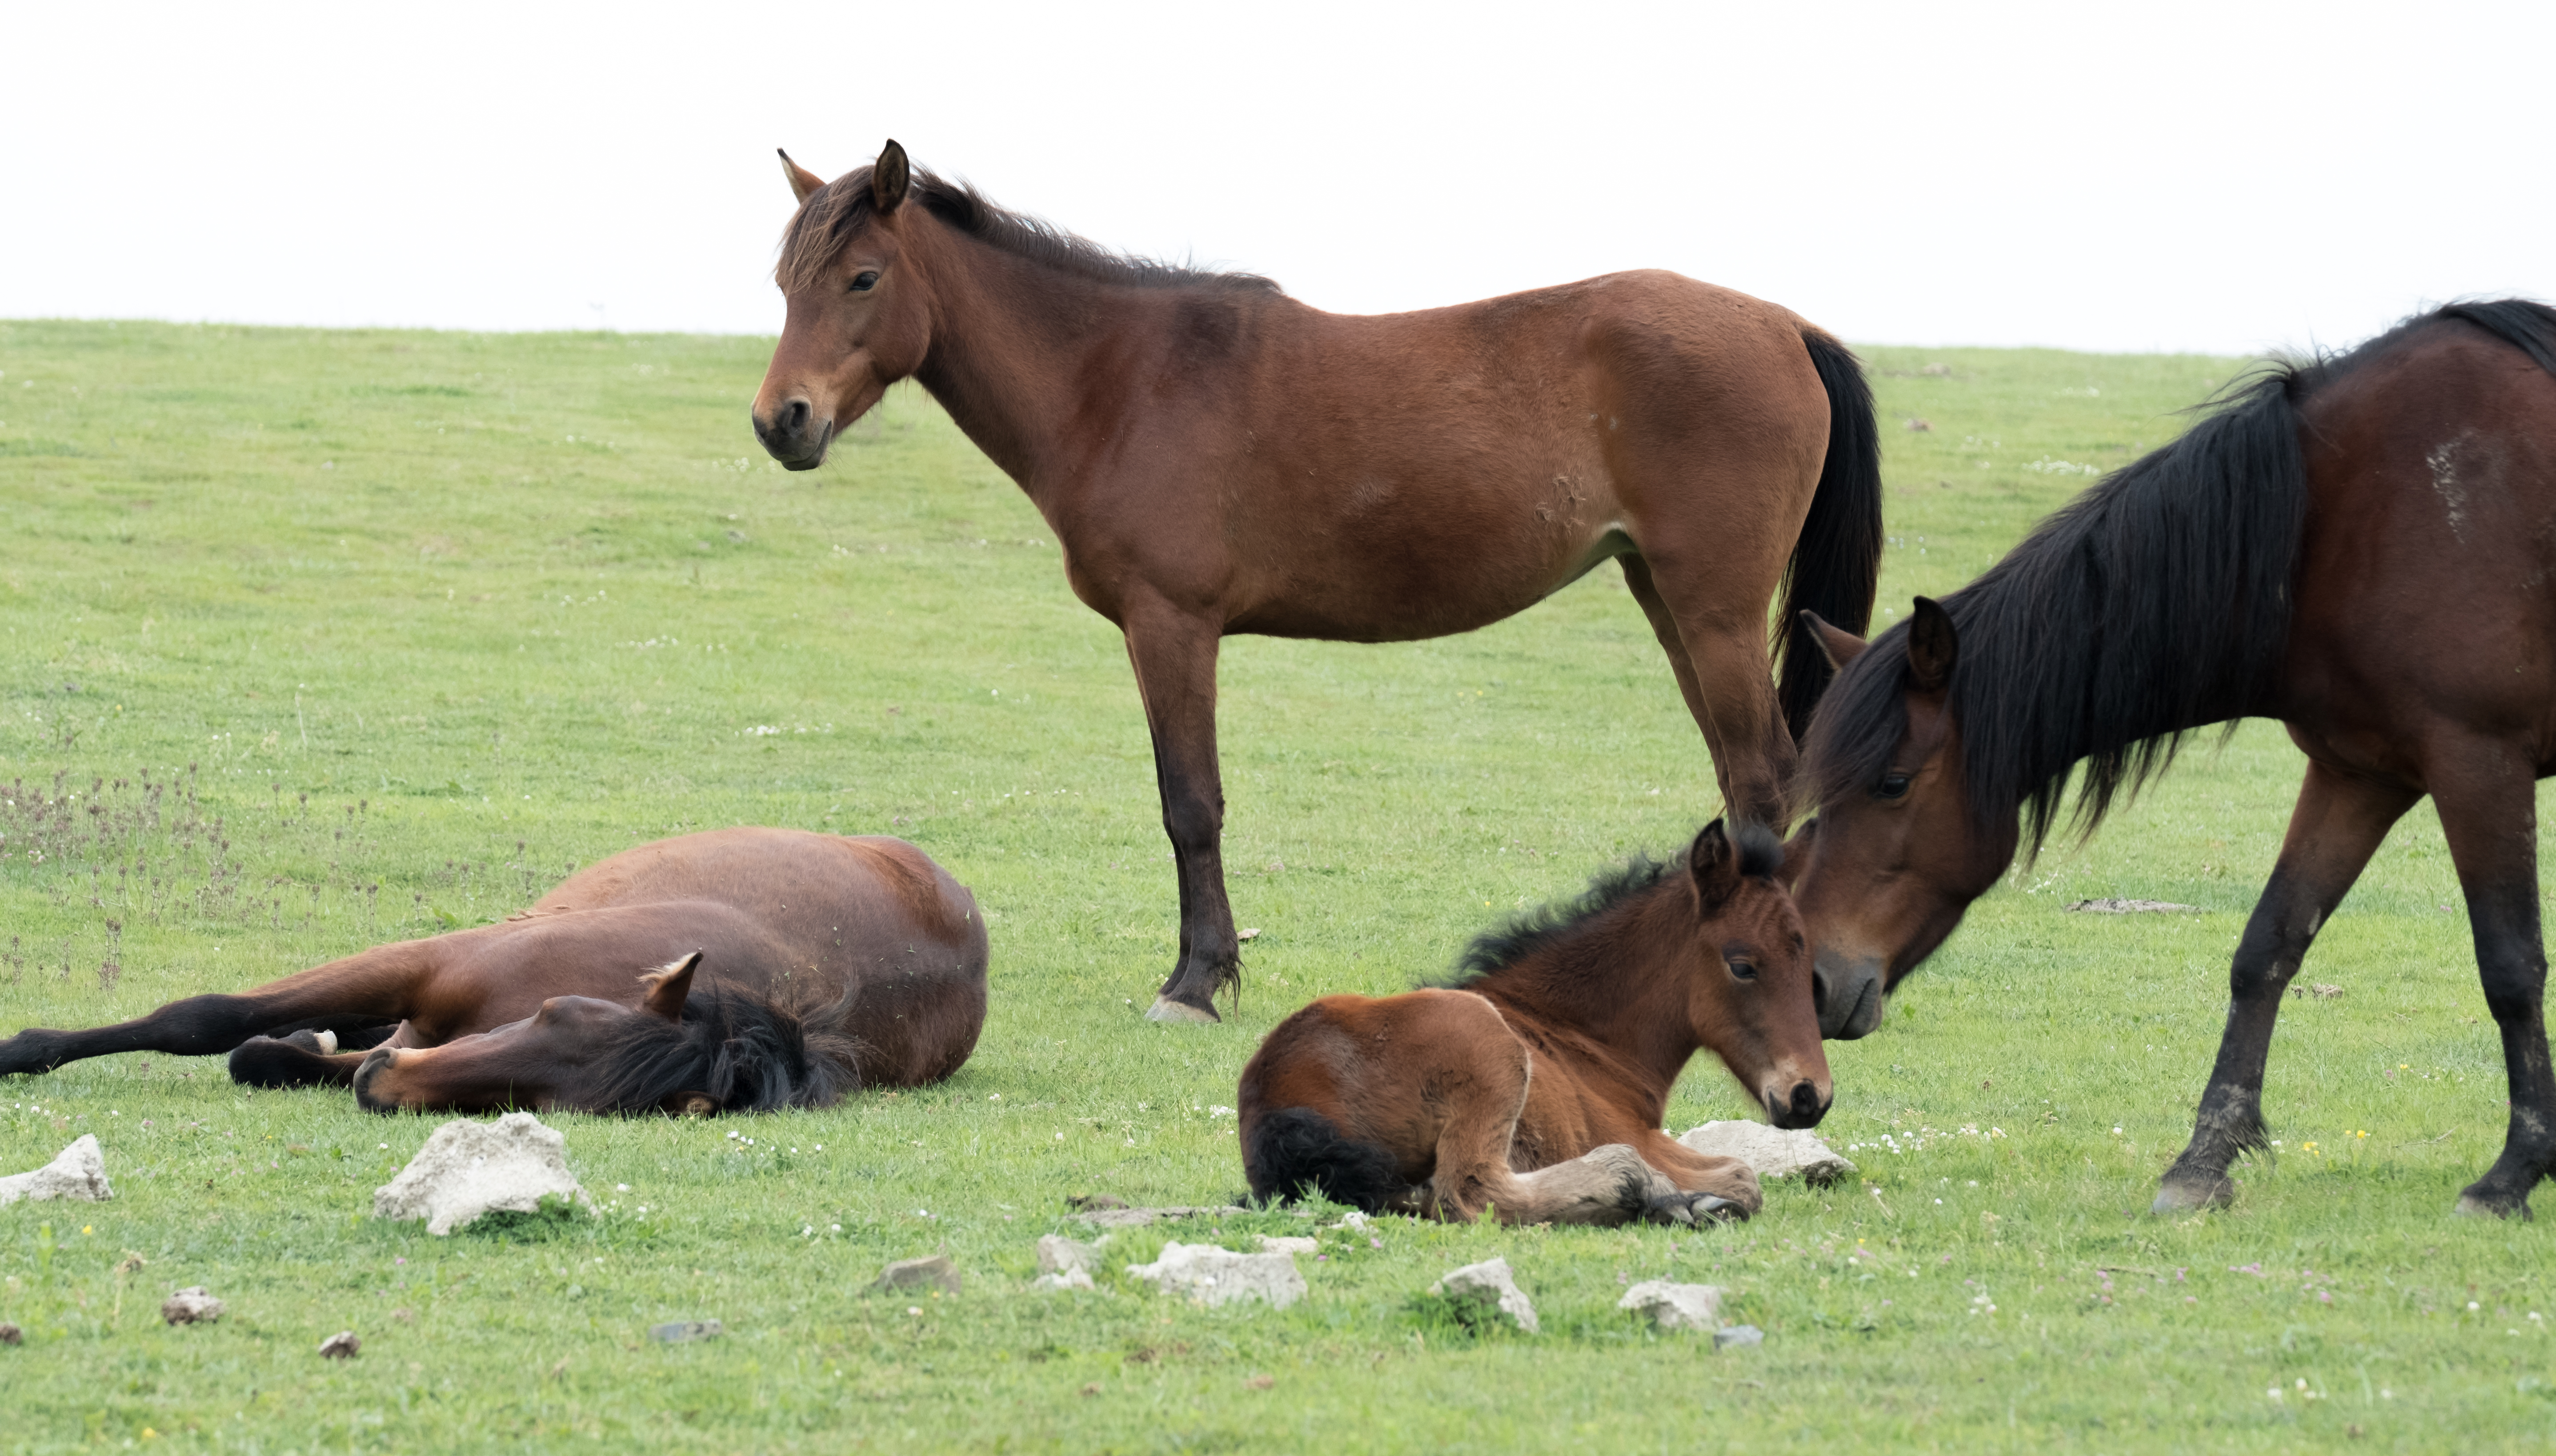 A family of horses grazing.